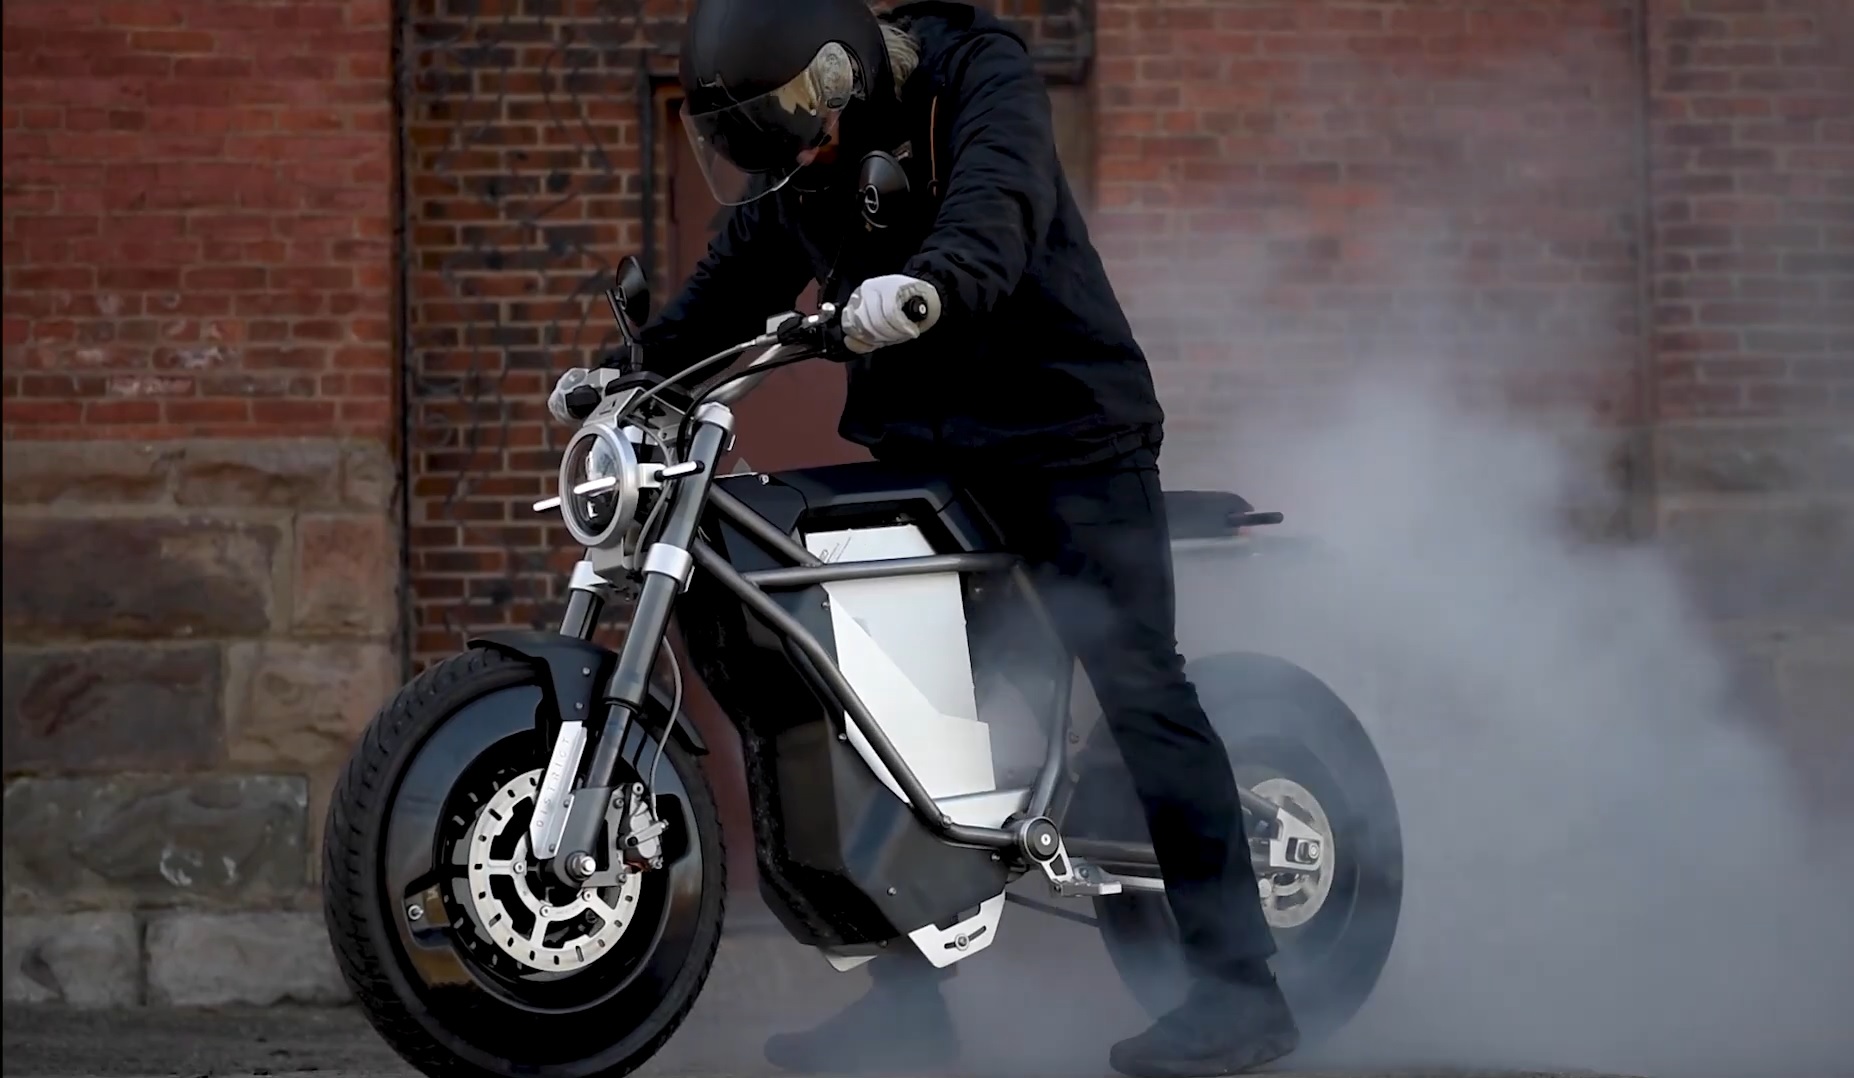 Rider doing burnout on an electric motorcycle